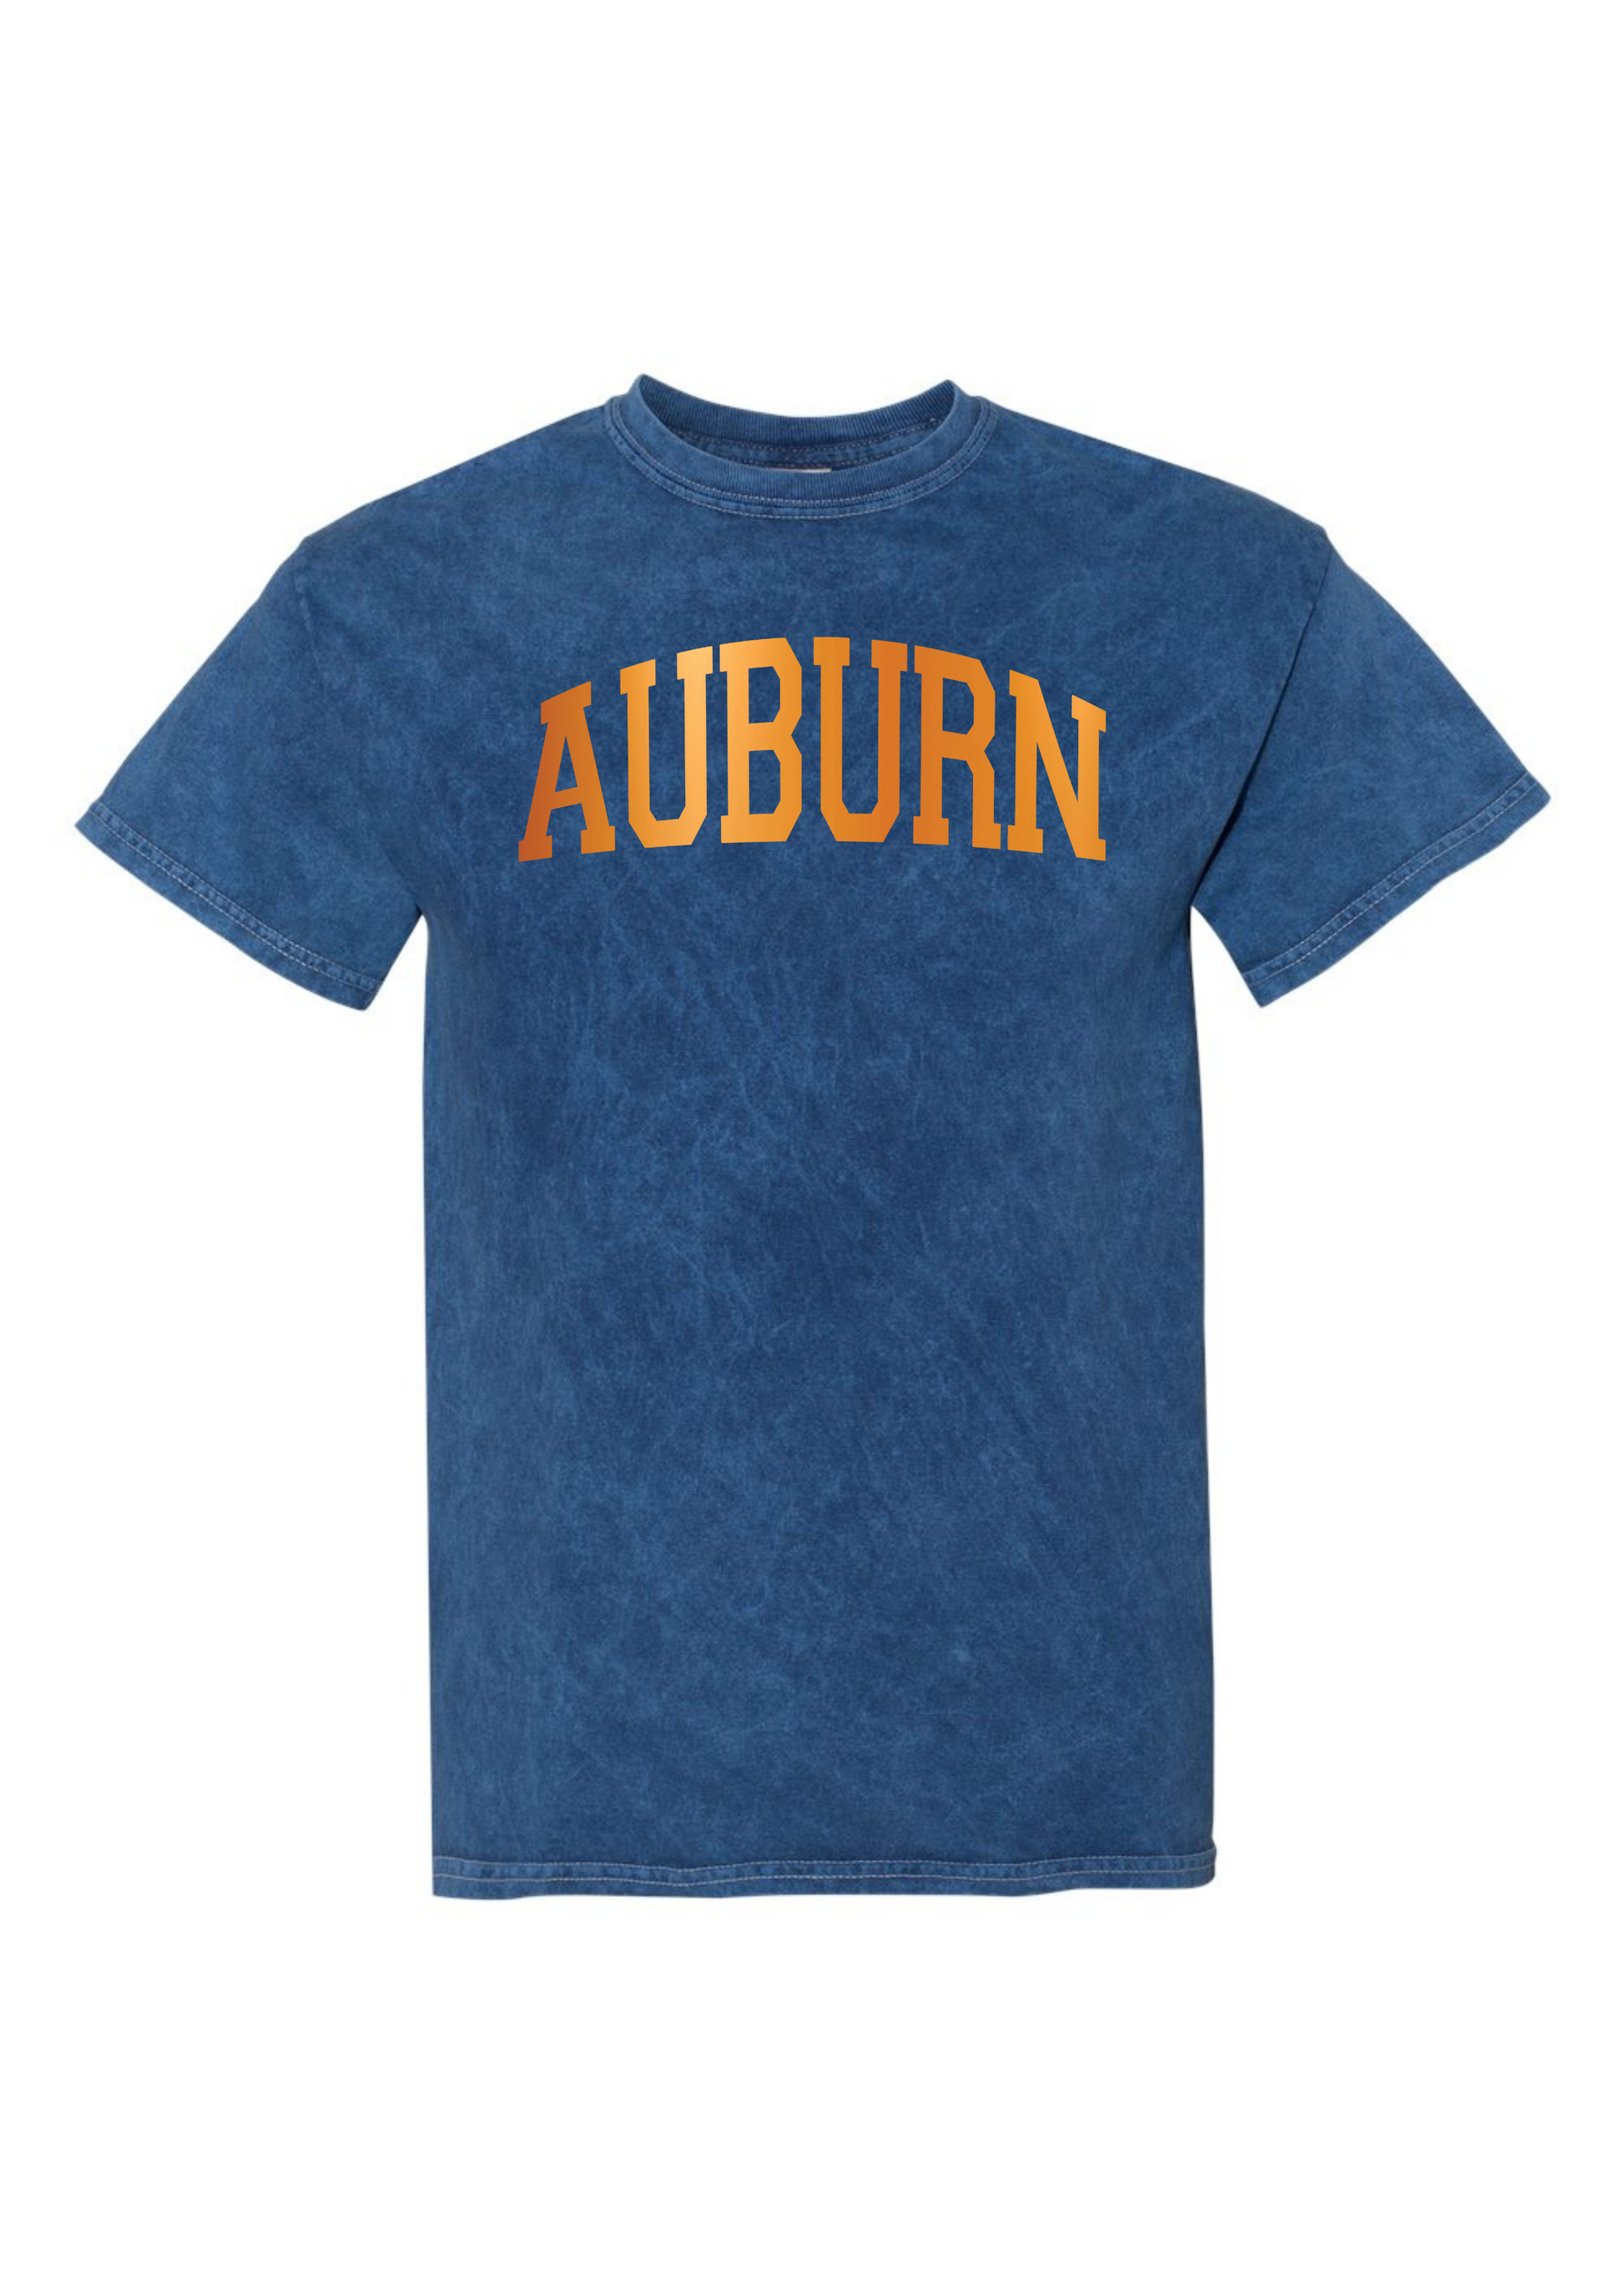 Auburn Foil | Adult Mineral Wash Tee-Adult Tee-Sister Shirts-Sister Shirts, Cute & Custom Tees for Mama & Littles in Trussville, Alabama.